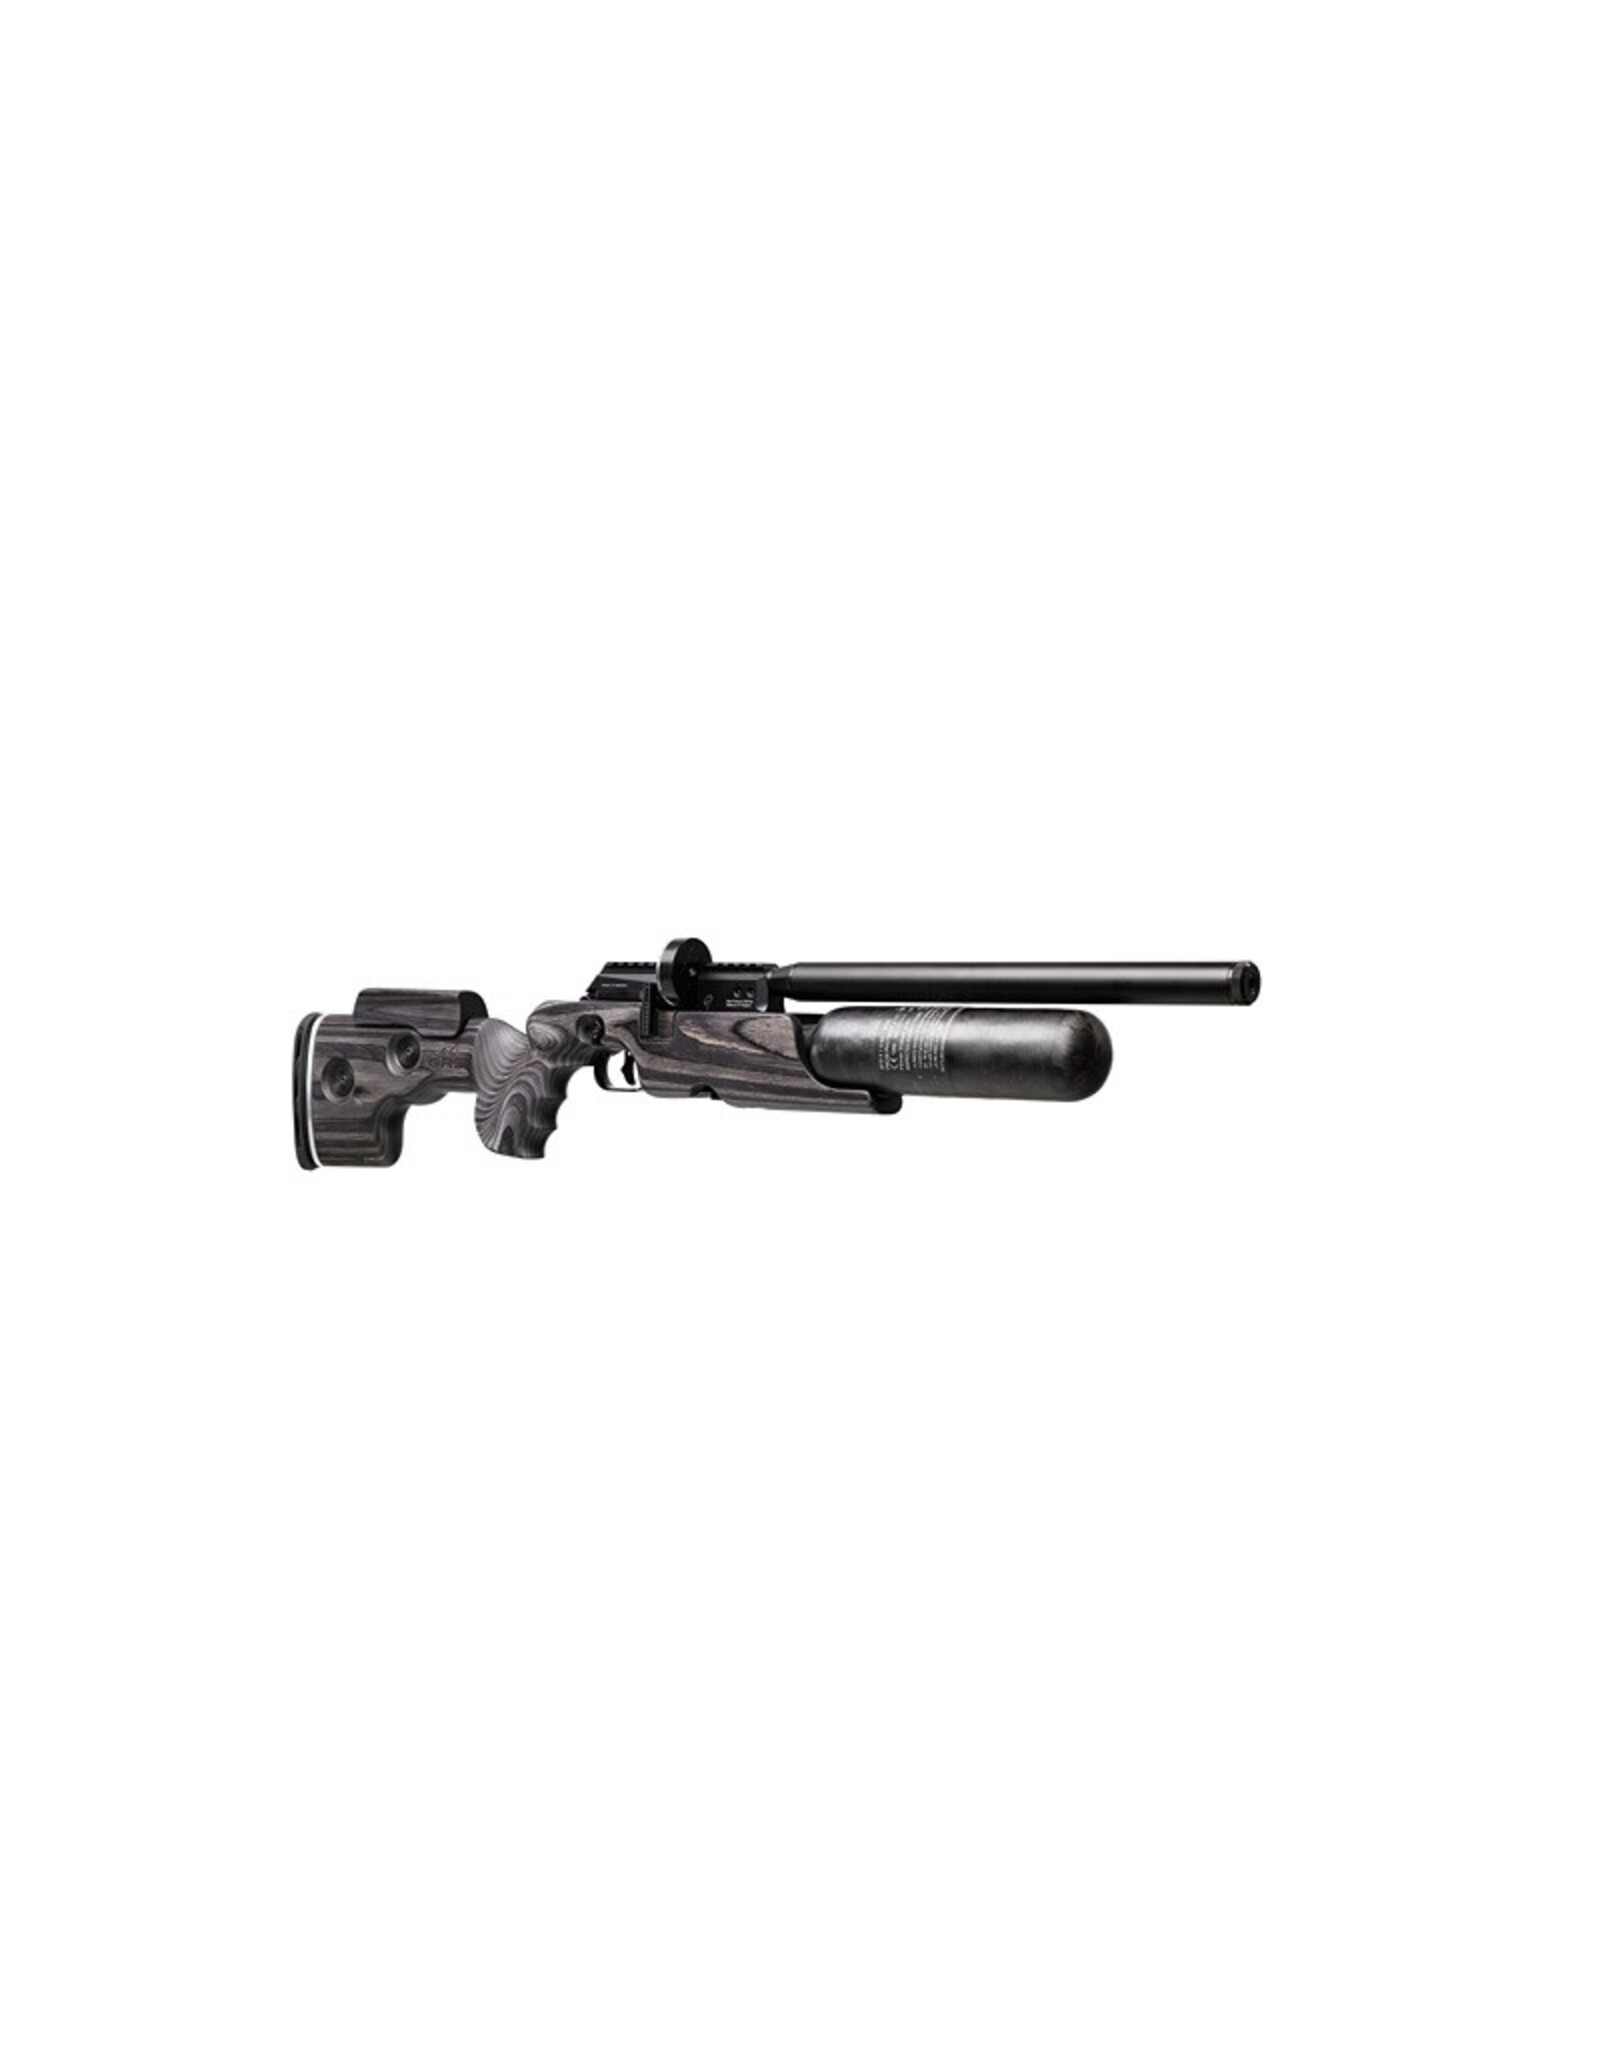 FX Airguns FX Crown MKII Standard, GRS Nordic Wolf Laminate  - Right Hand - 0.30 caliber